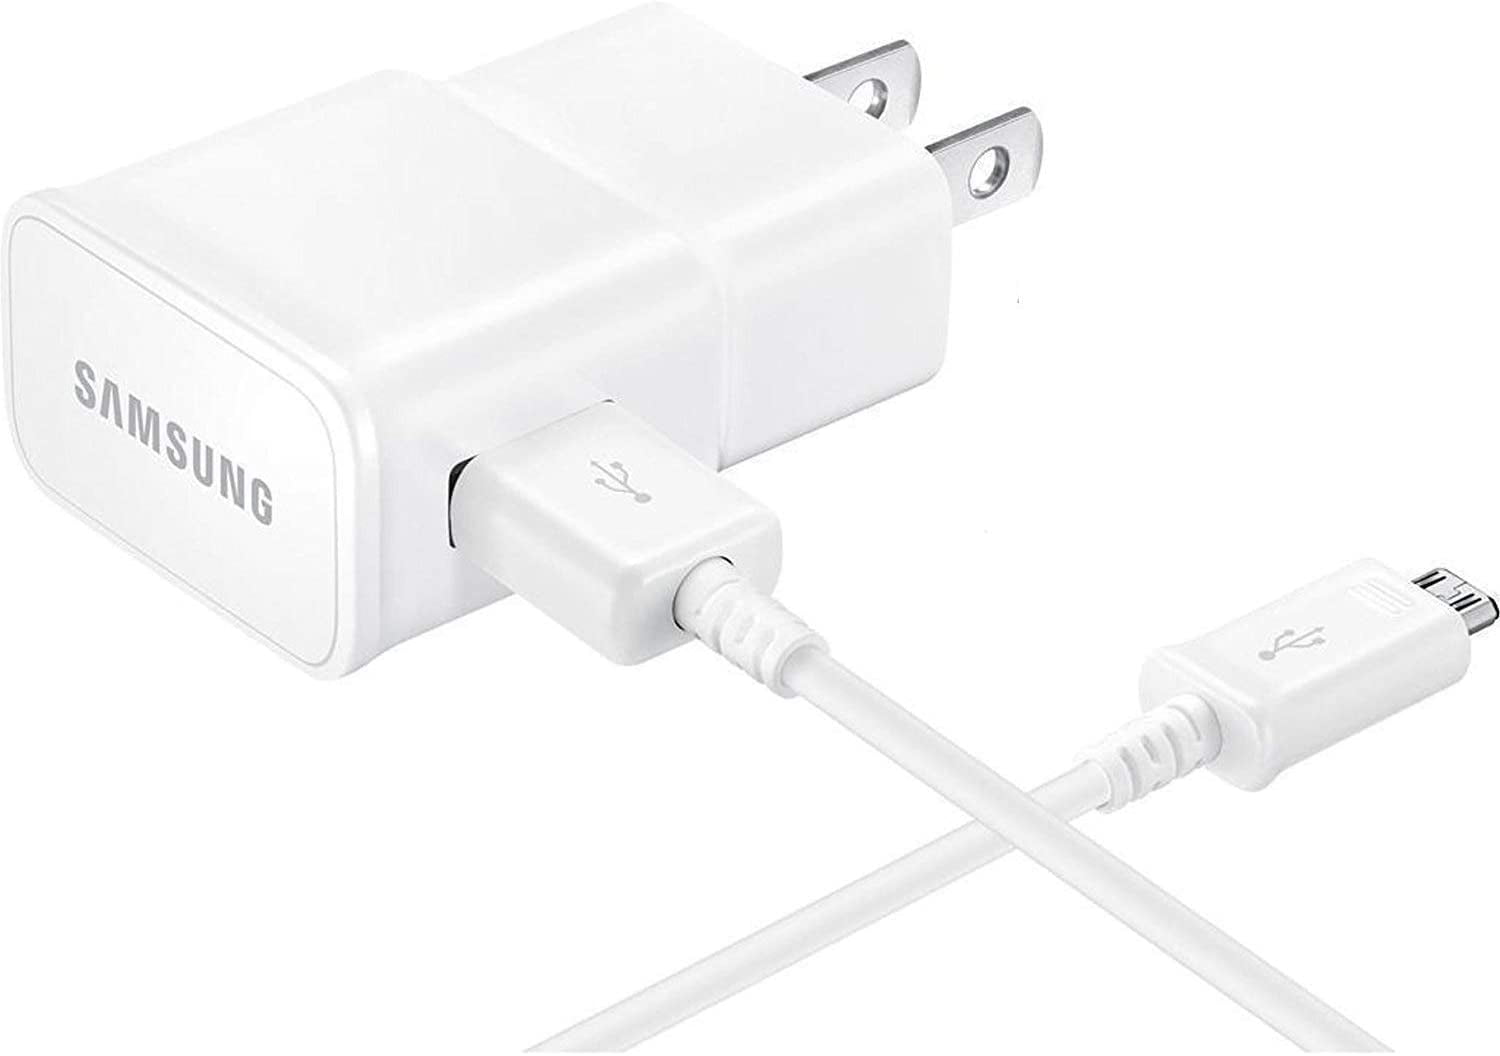 Samsung Galaxy S7 Adaptive Fast Charger Micro USB  Cable Kit! [1 Wall  Charger + 5 FT Micro USB Cable] Adaptive Fast Charging uses dual voltages  for up to 50% faster charging! 